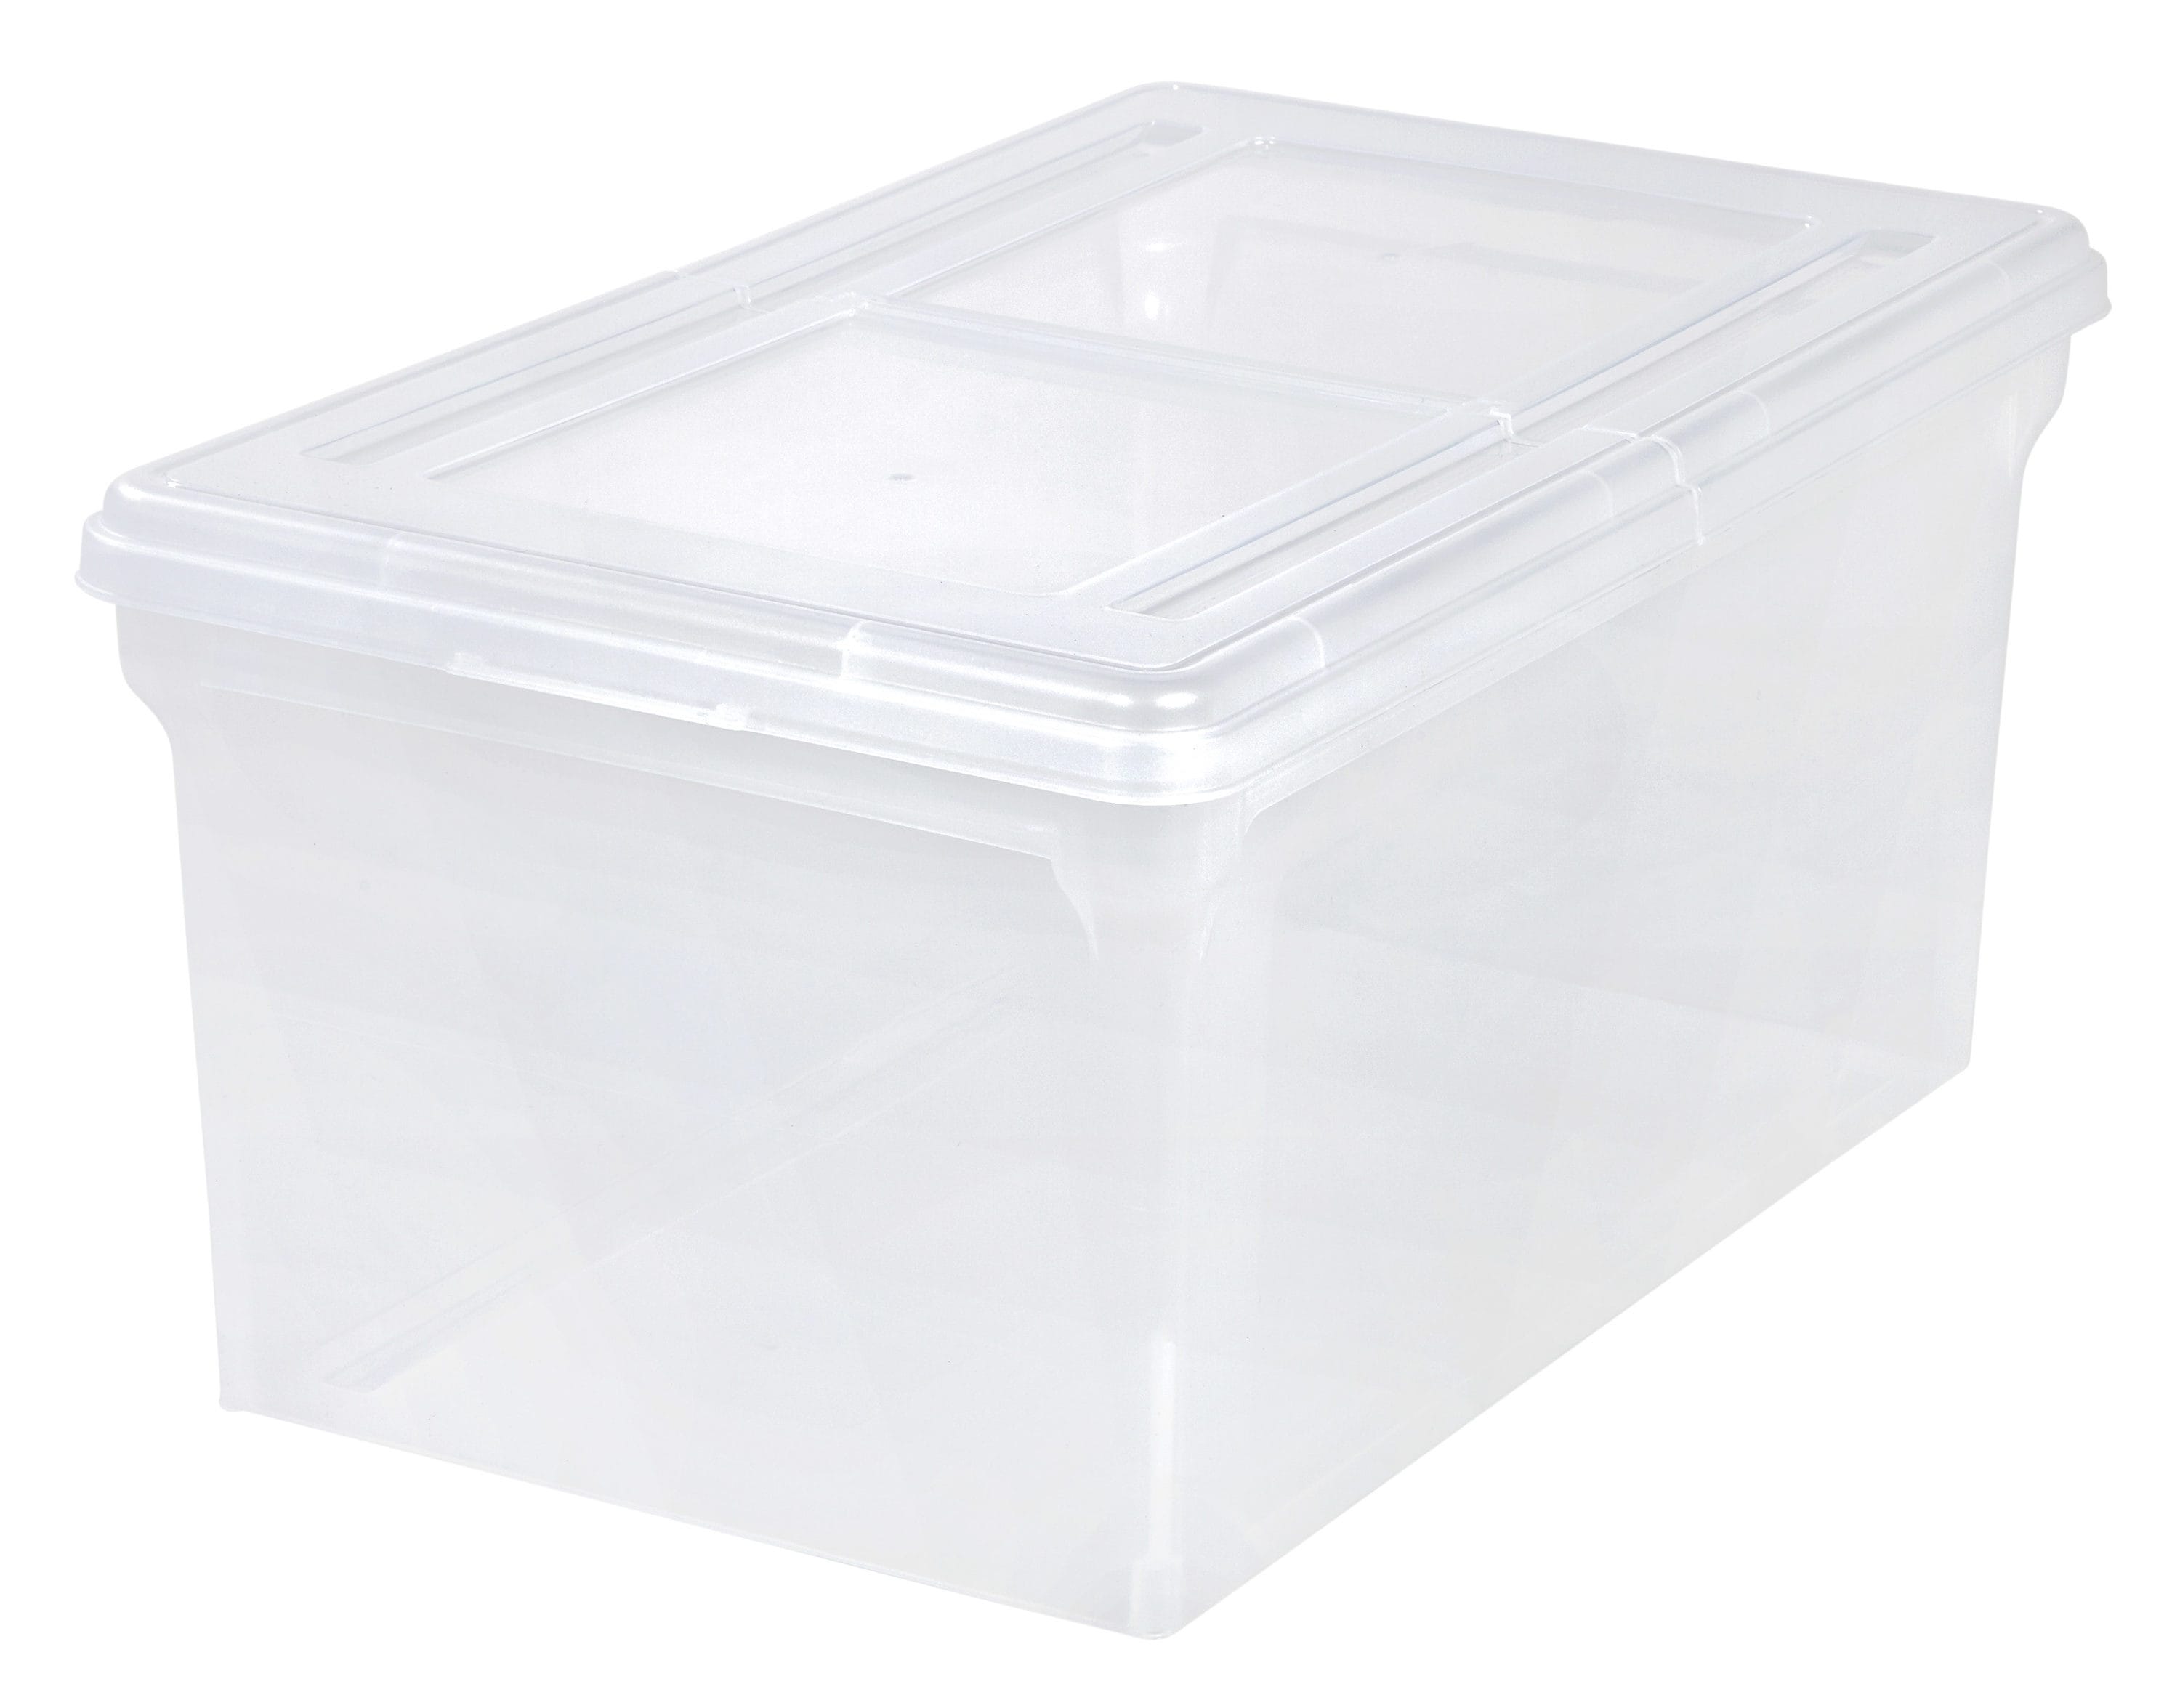 IRIS Large 11-Gallons (44-Quart) Clear Tote with Standard Snap Lid